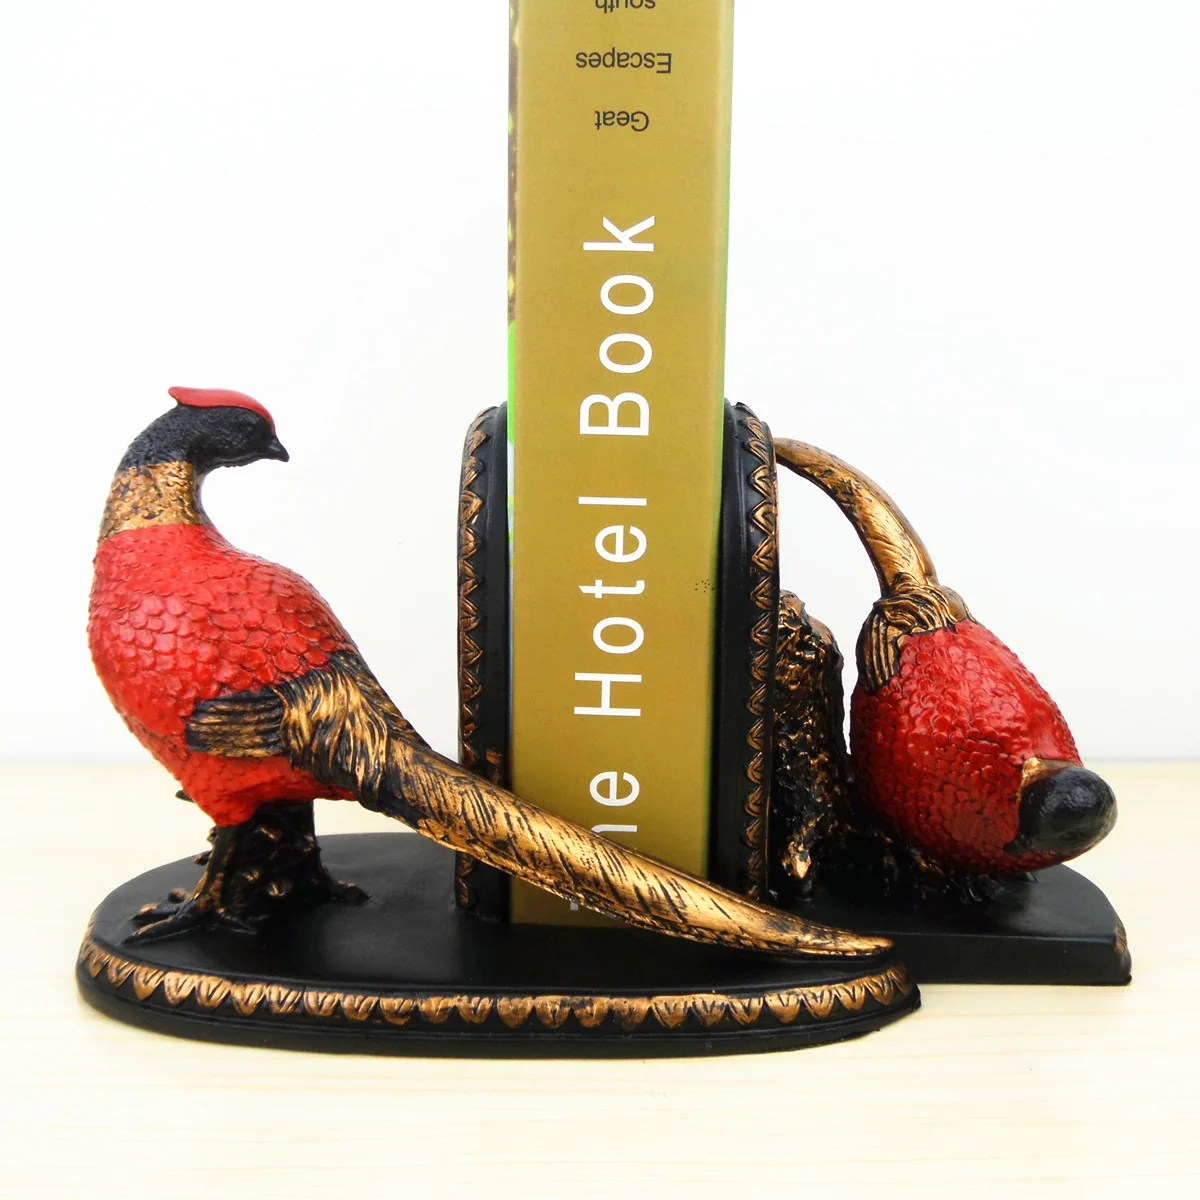 Creative Acacia Bird Book Depends on American Home Accessories, Study, Bookcase, Resin Crafts, Bookstand